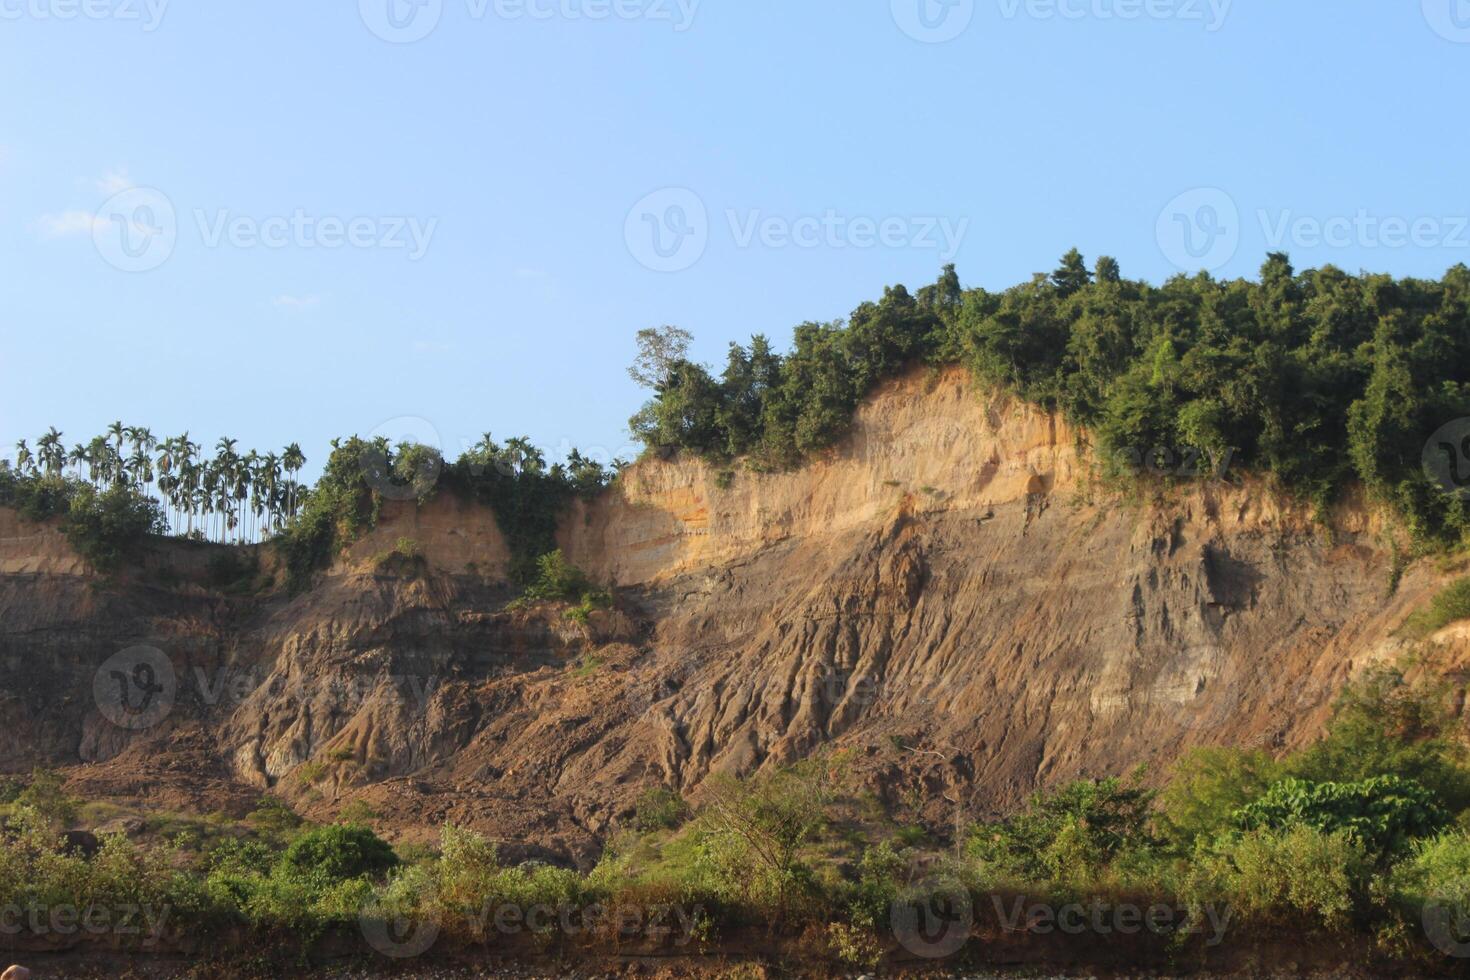 You can use the hill cliffs on the edge of the river as wallpaper photo